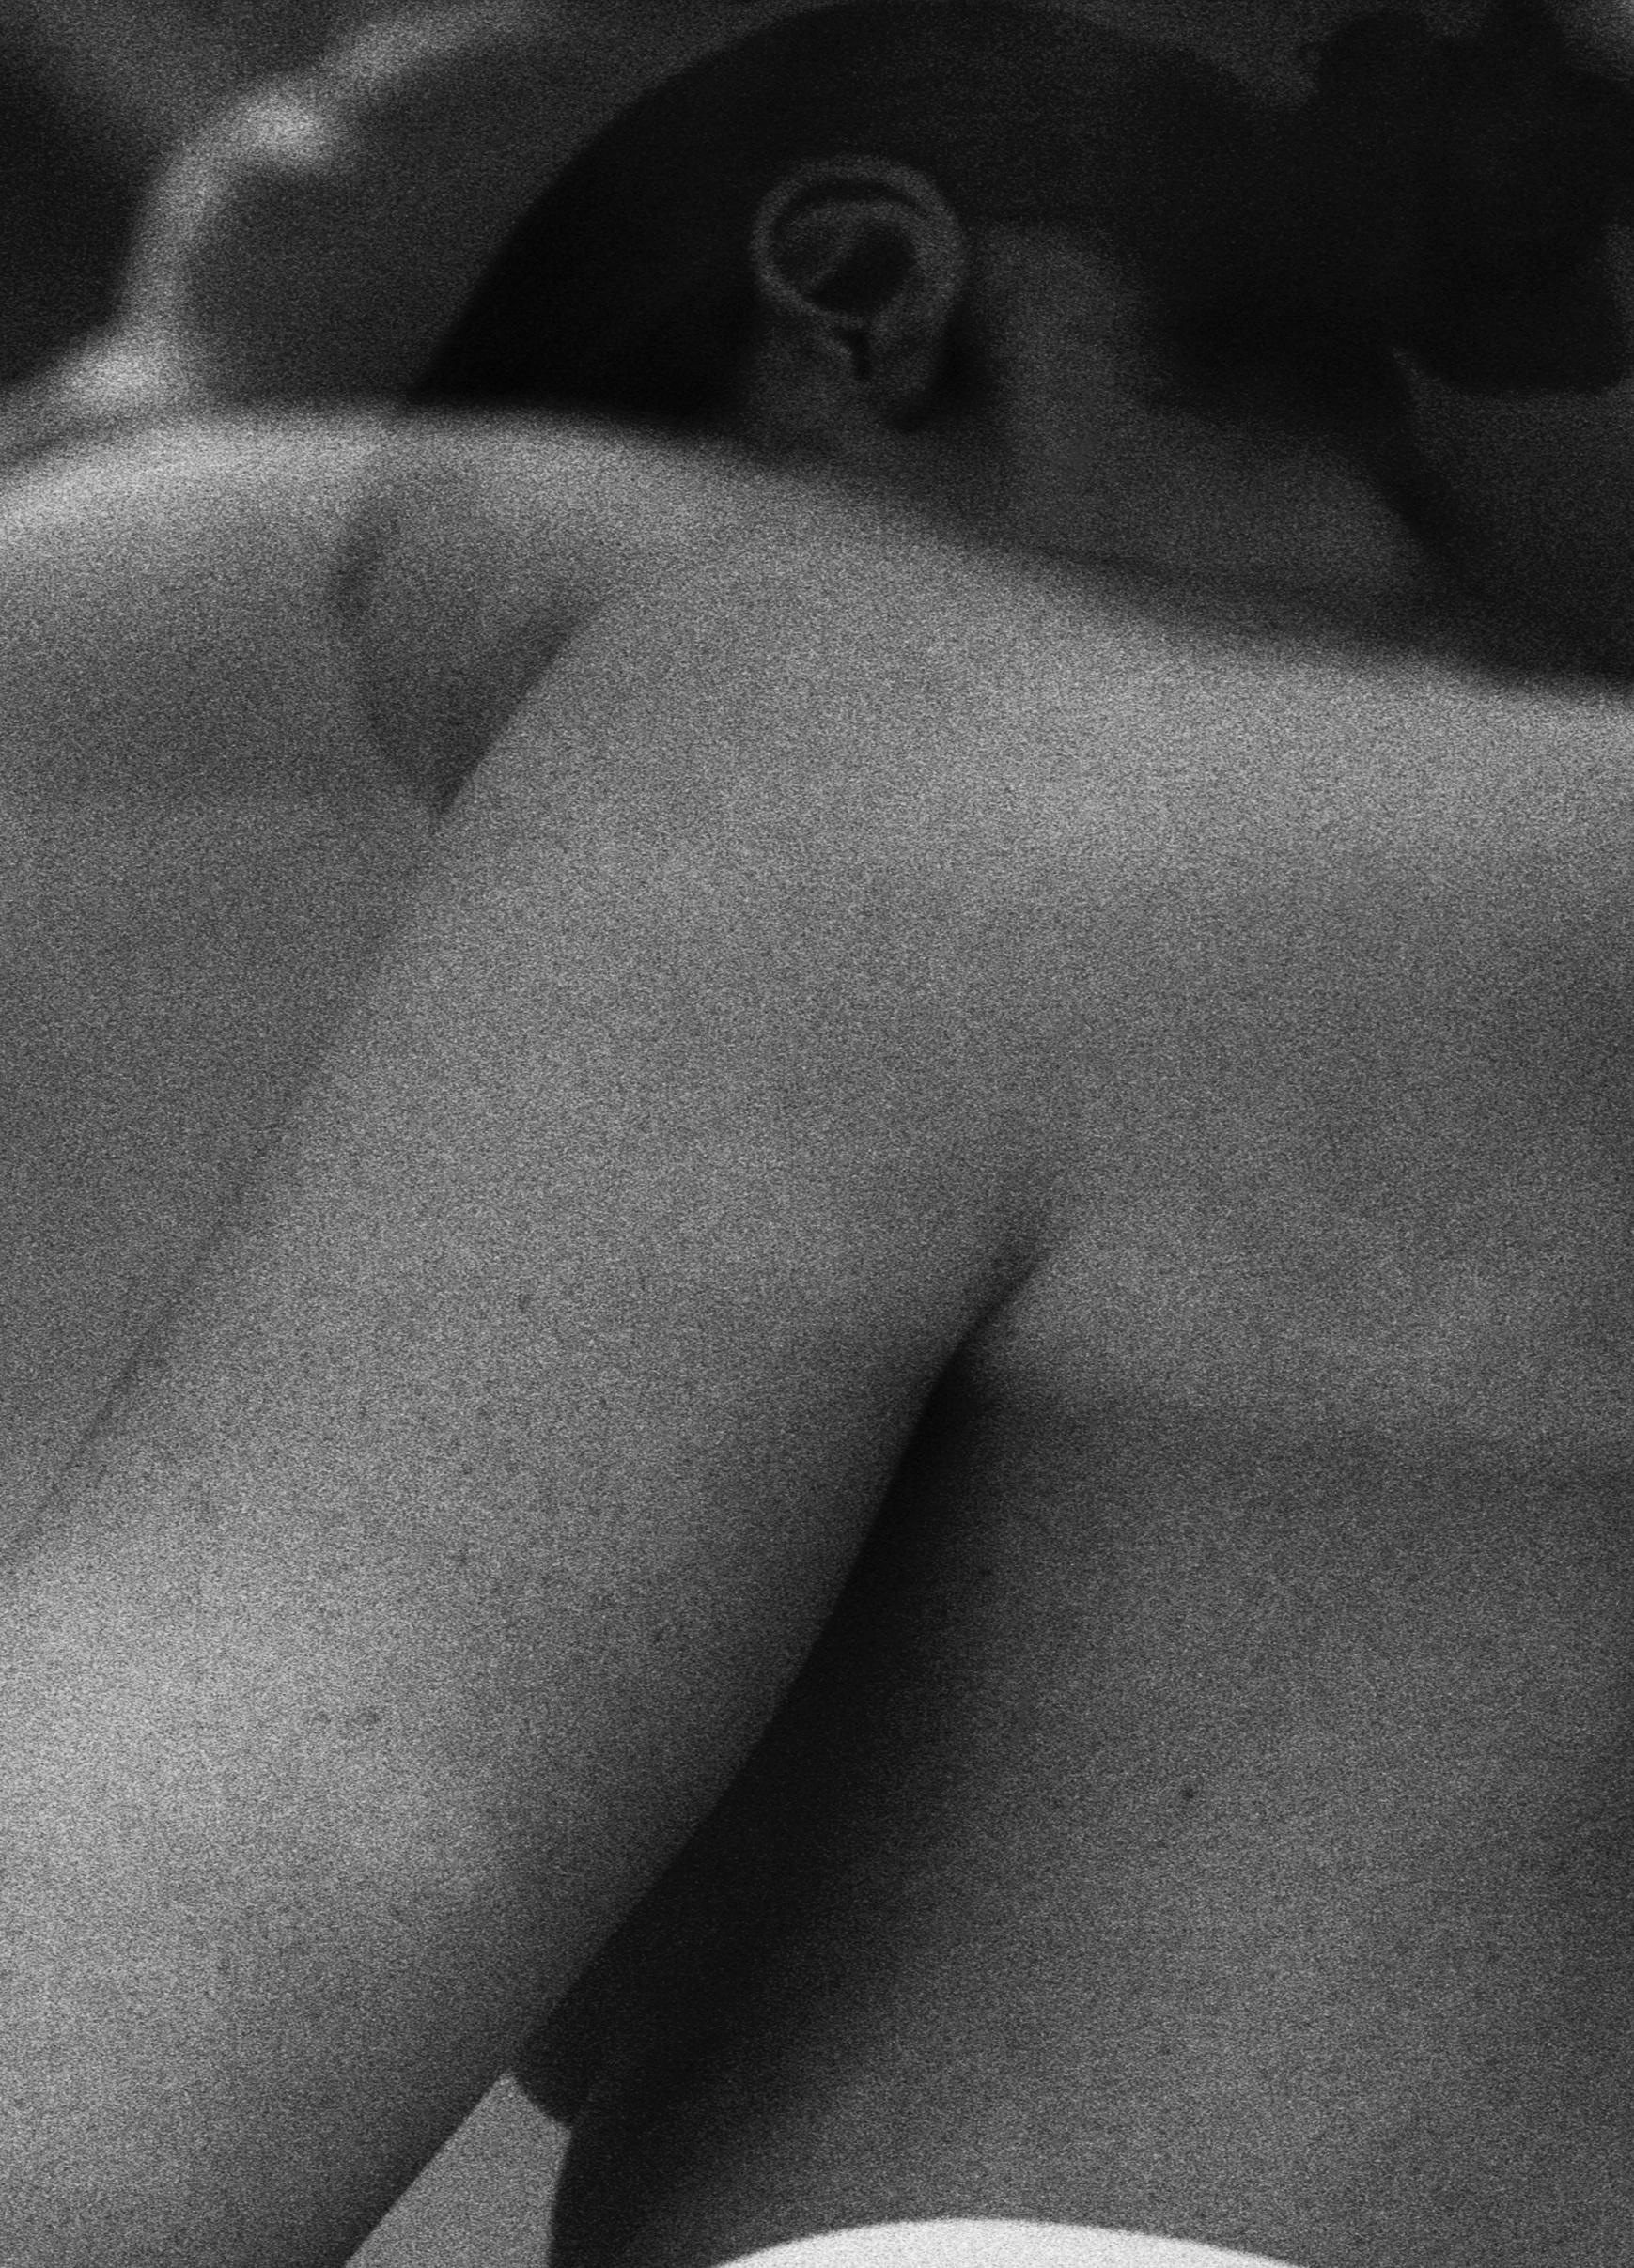 Untitled (Touching) – Lina Scheynius, Black and White, Woman, Body, Nude, Female For Sale 2